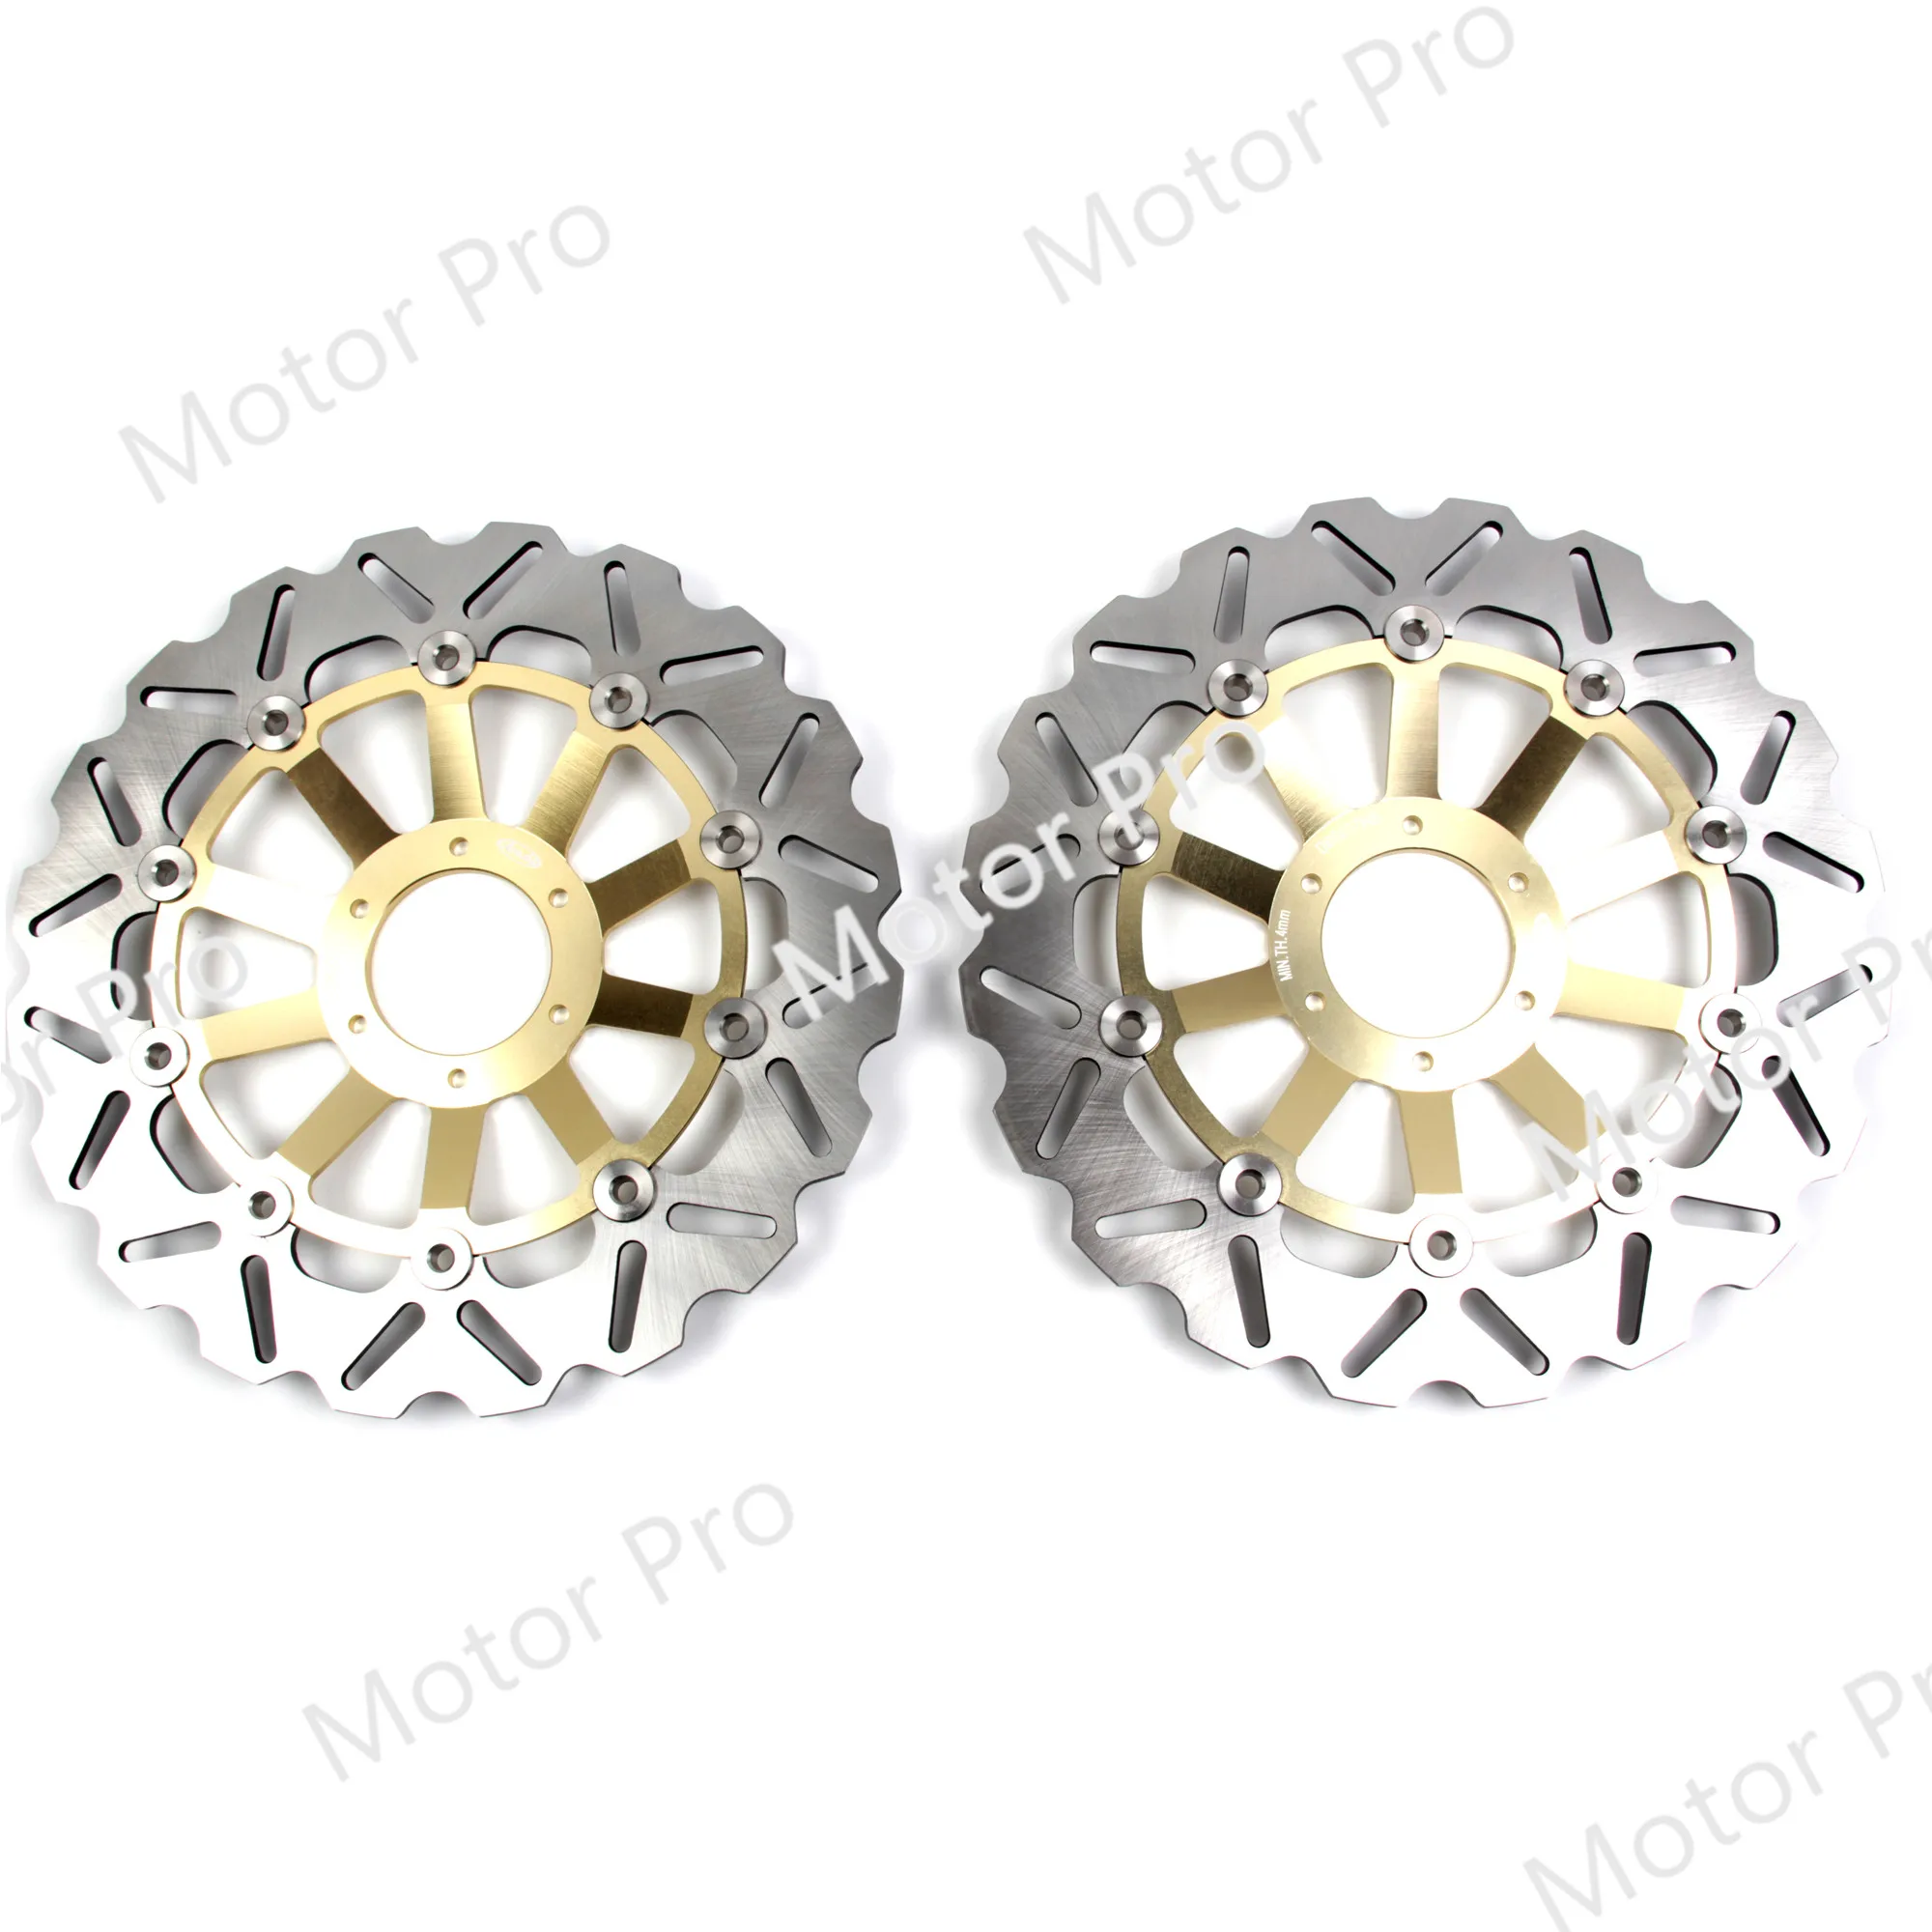 

Motorcycle Replacement Floating Disks For Honda CB600F HORNET 1998 1999 Front Rear Brake Disc Rotor Kit CB 600 F CB600 600F